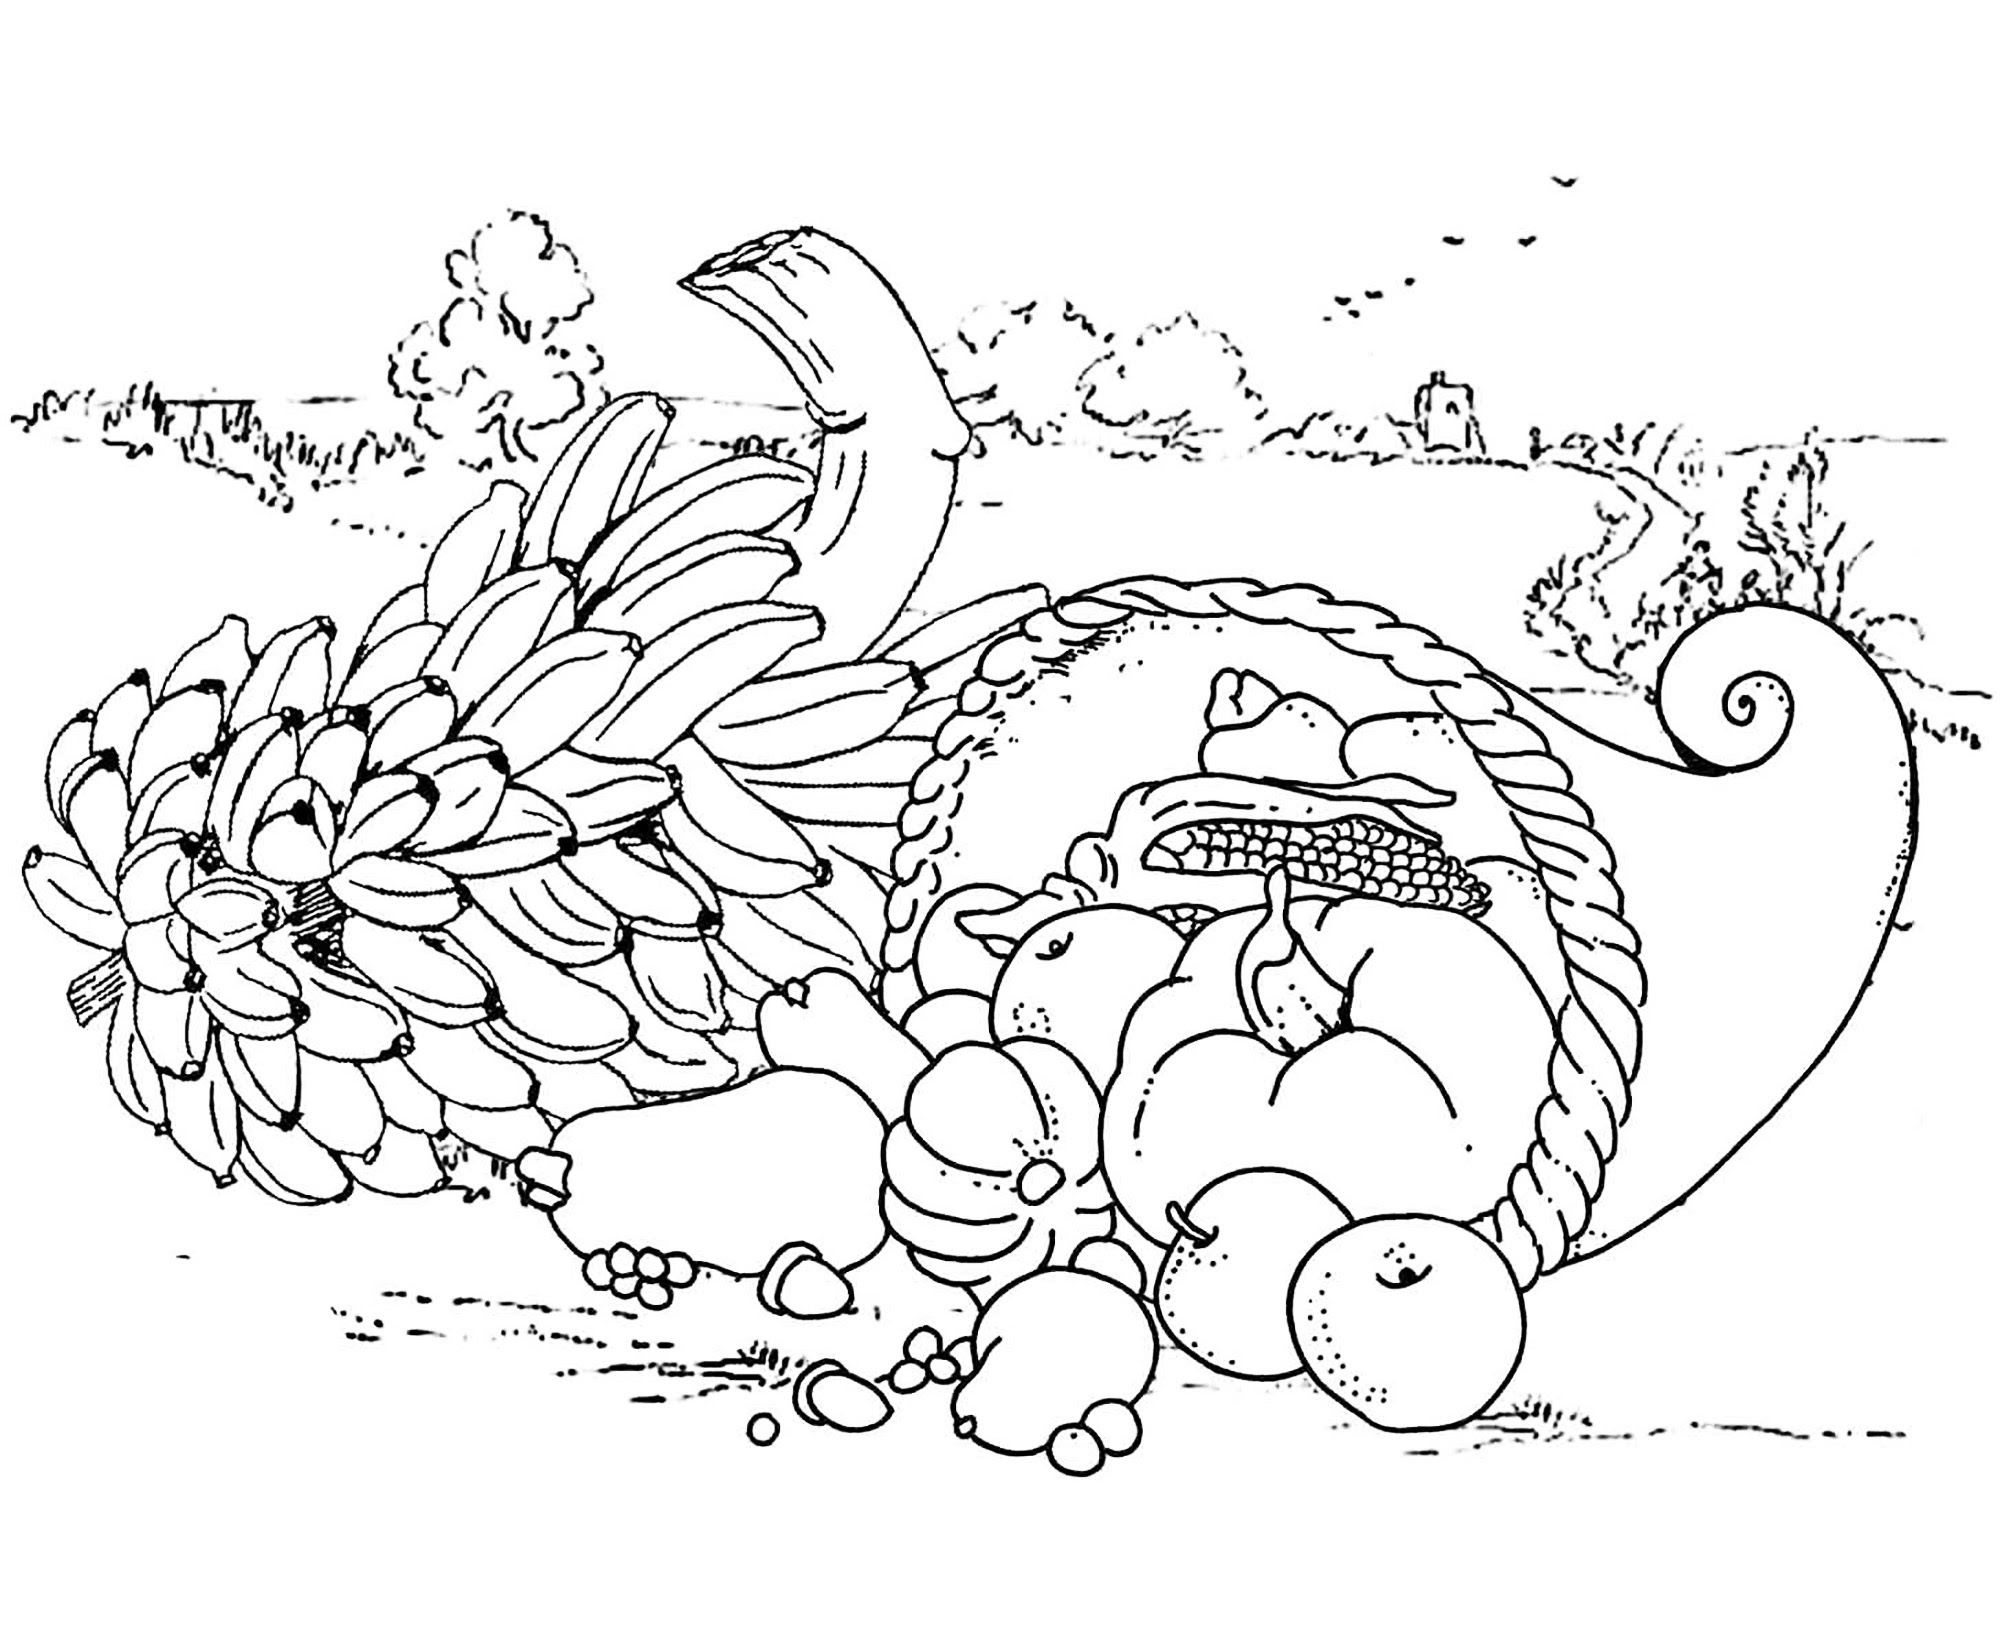 Download Coloring Pictures For Adults With Dementia - Coloring Ideas